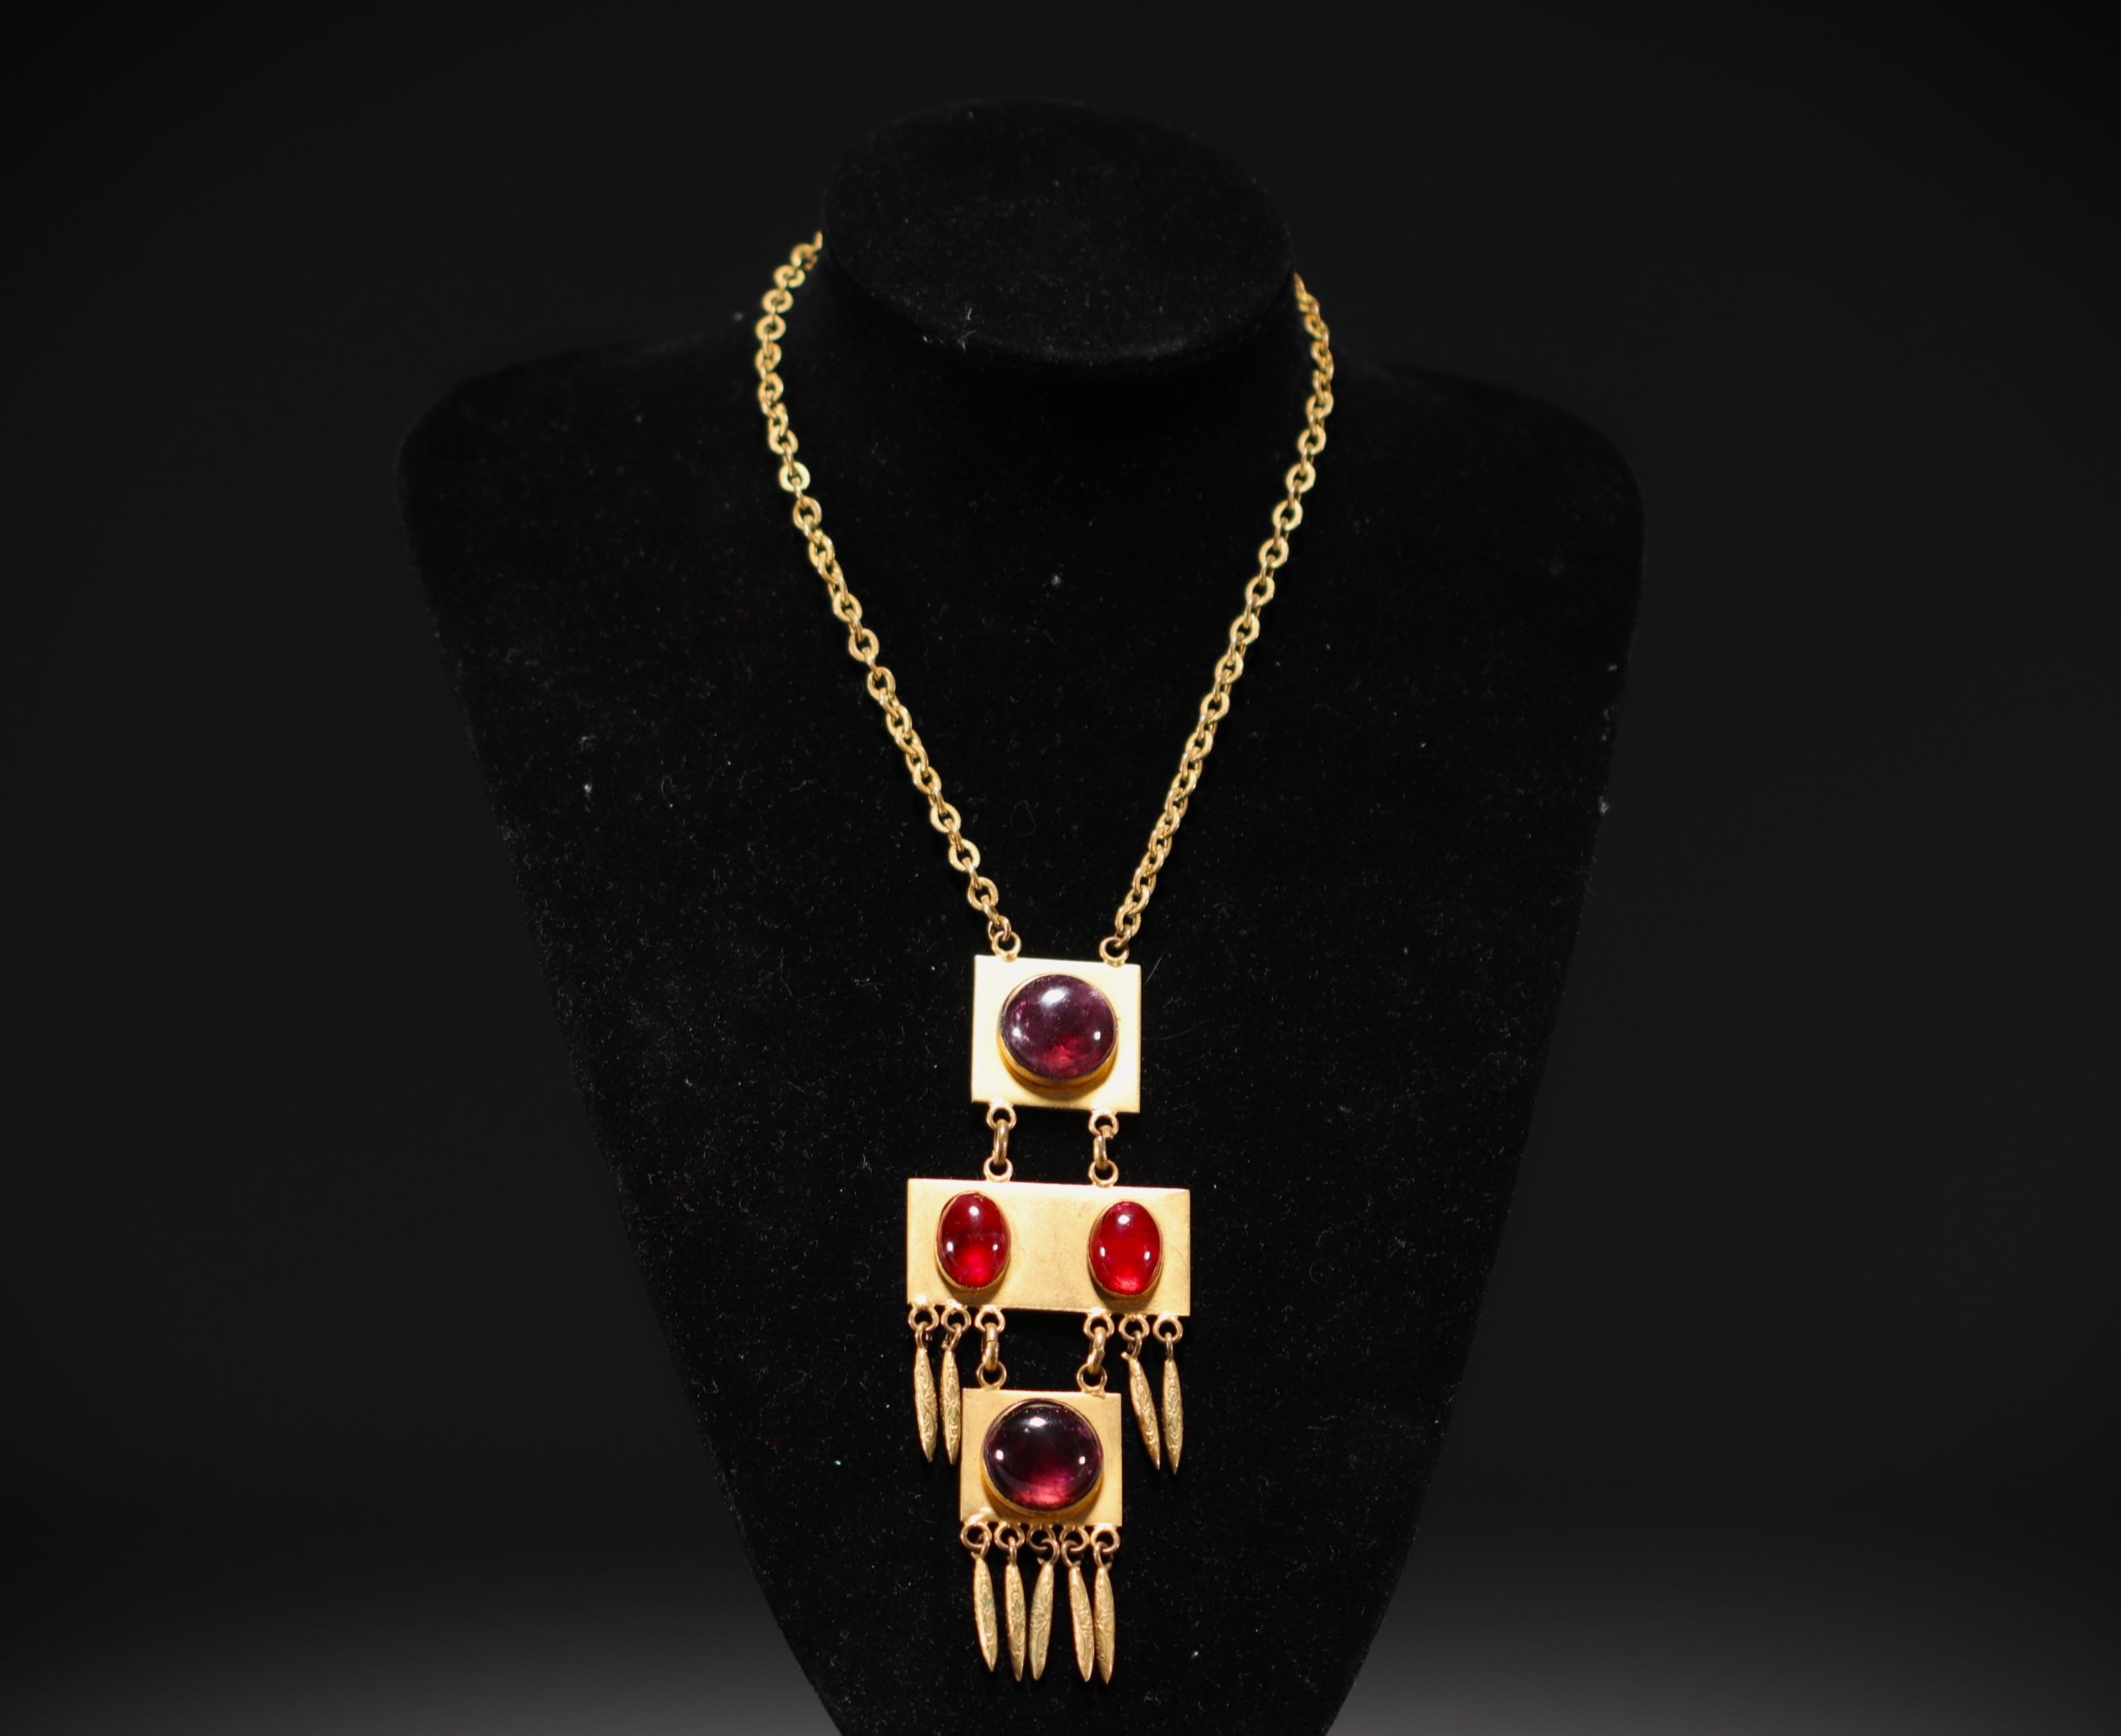 Roger SCEMAMA (1898-1989) attr. to for Yves Saint Laurent, necklace in gilt metal and glass cabochon - Image 2 of 2